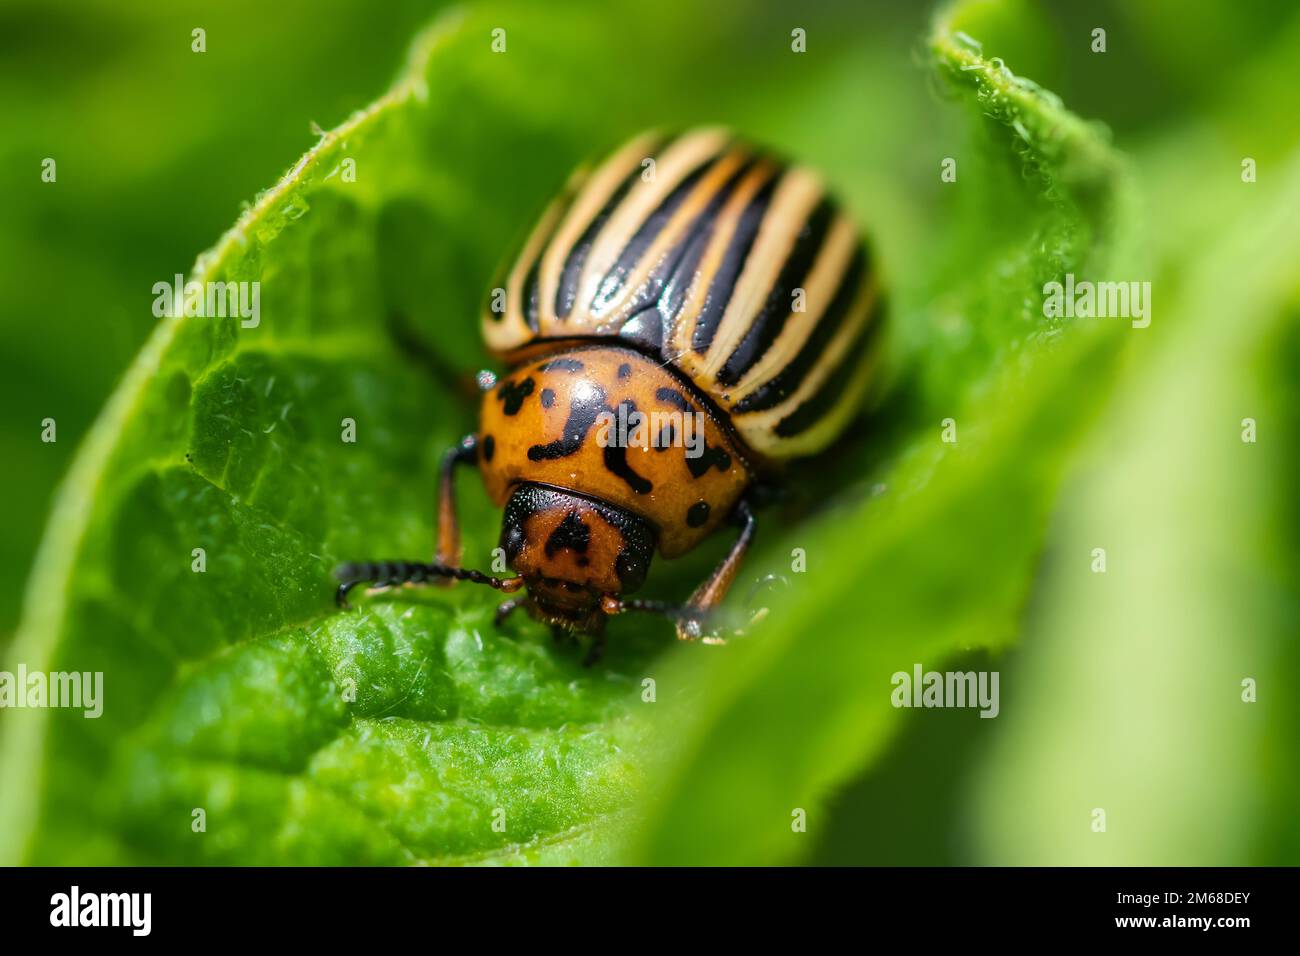 The Colorado potato beetle Leptinotarsa decemlineata is a serious pest of potatoes, tomatoes and eggplants. Insecticides are currently the main method Stock Photo